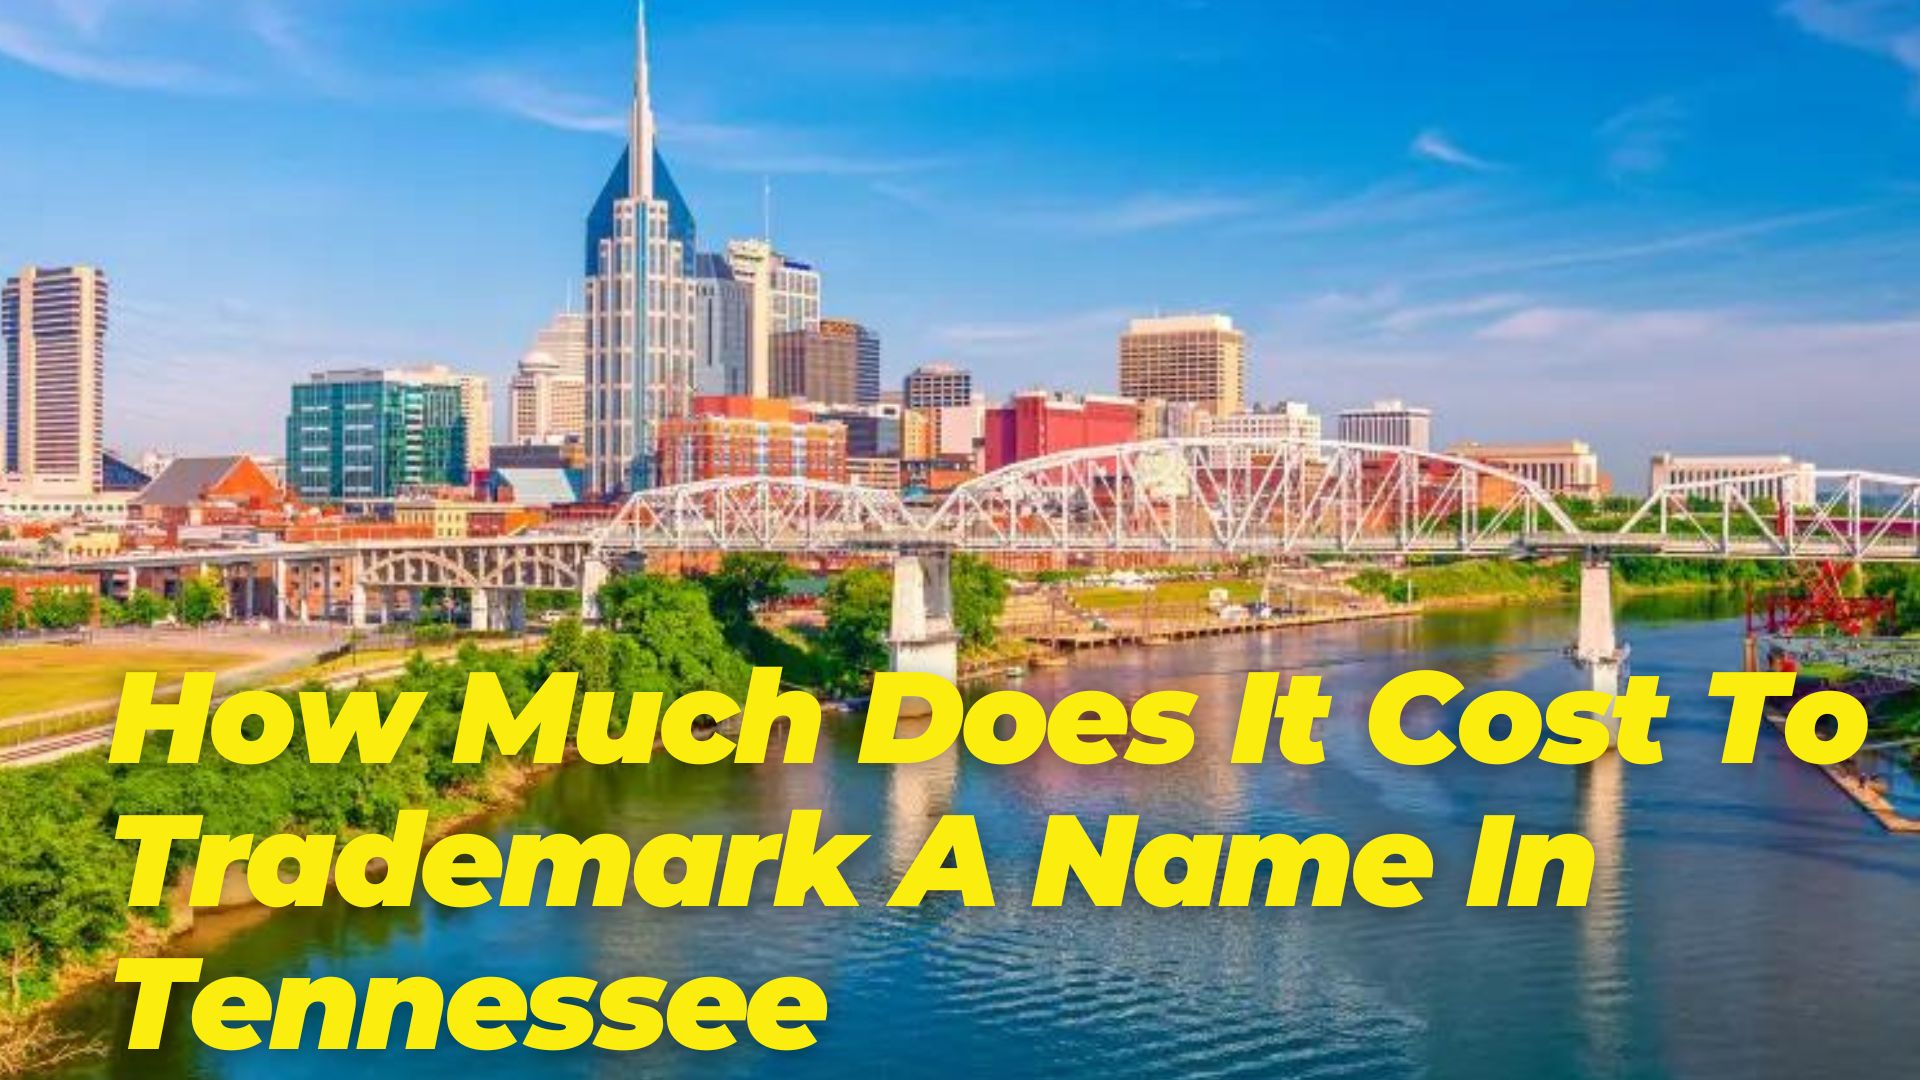 How Much Does It Cost To Trademark A Name In Tennessee